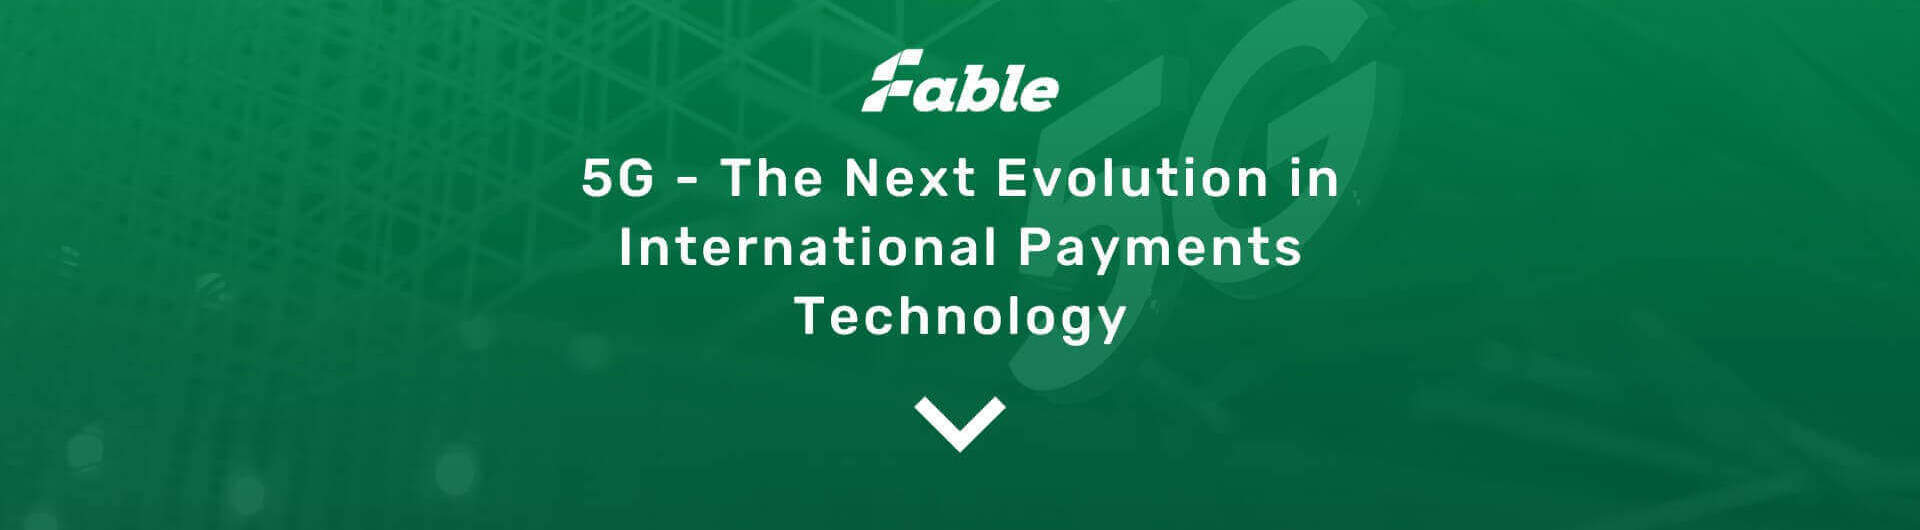 5G - The Next Evolution in International Payments Technology